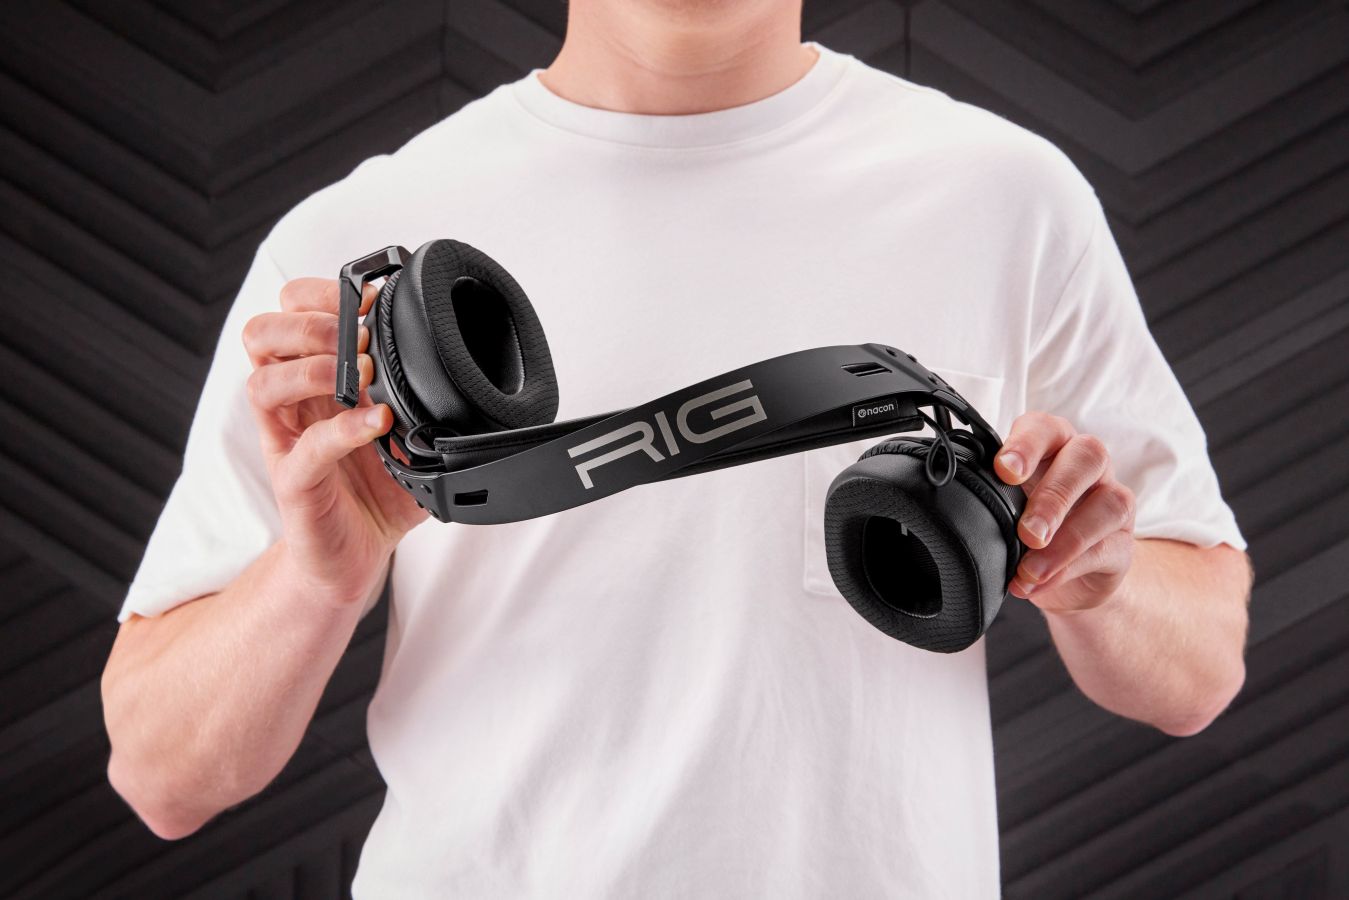 RIG 900 Max HX Dual Wireless Gaming Headset with Dolby Atmos